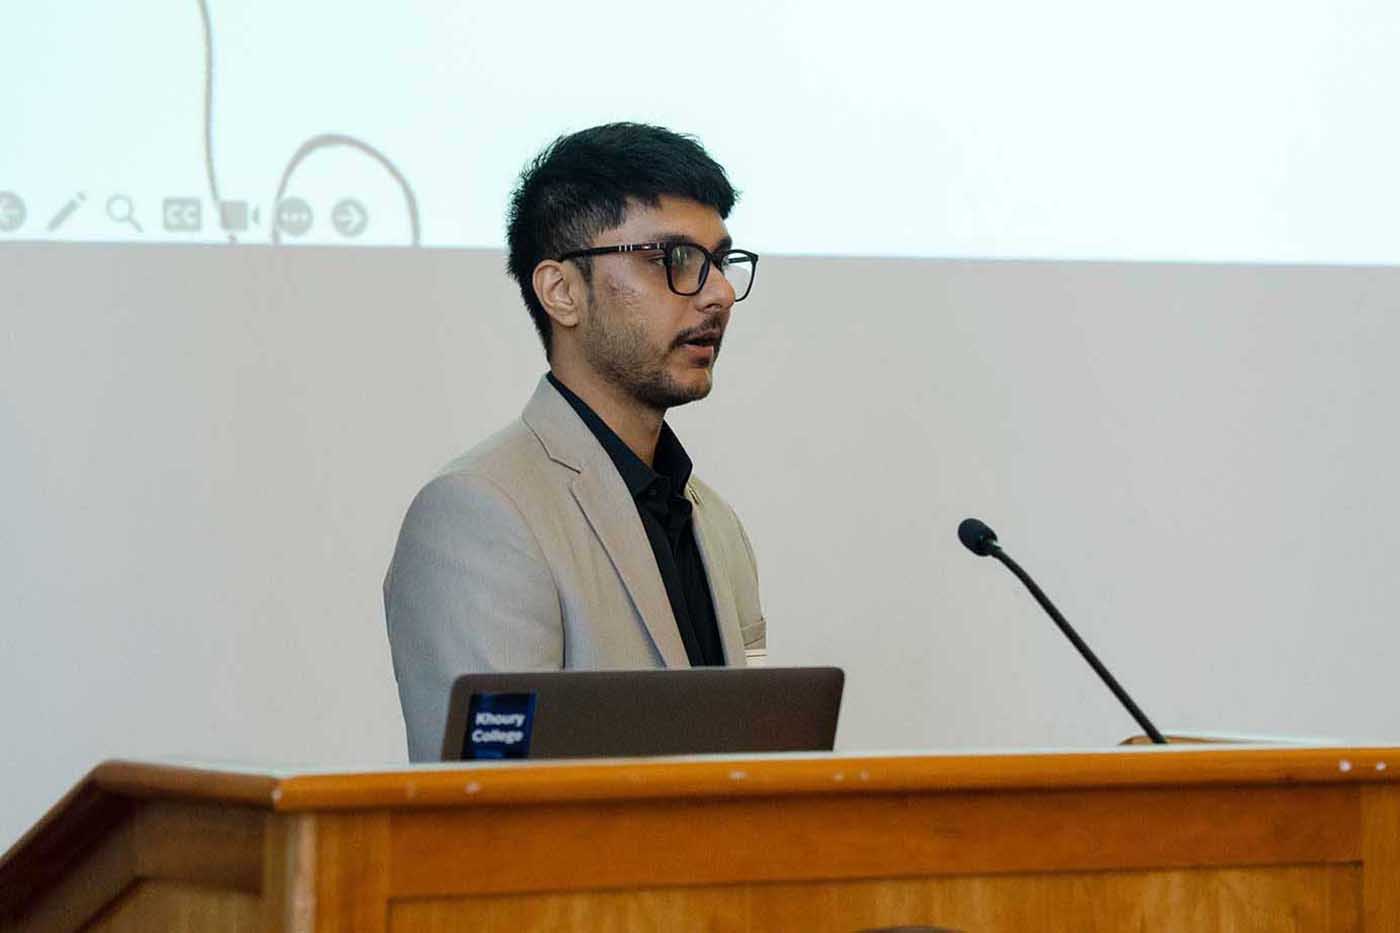 Anish Pawar presents a project while standing behind a podium